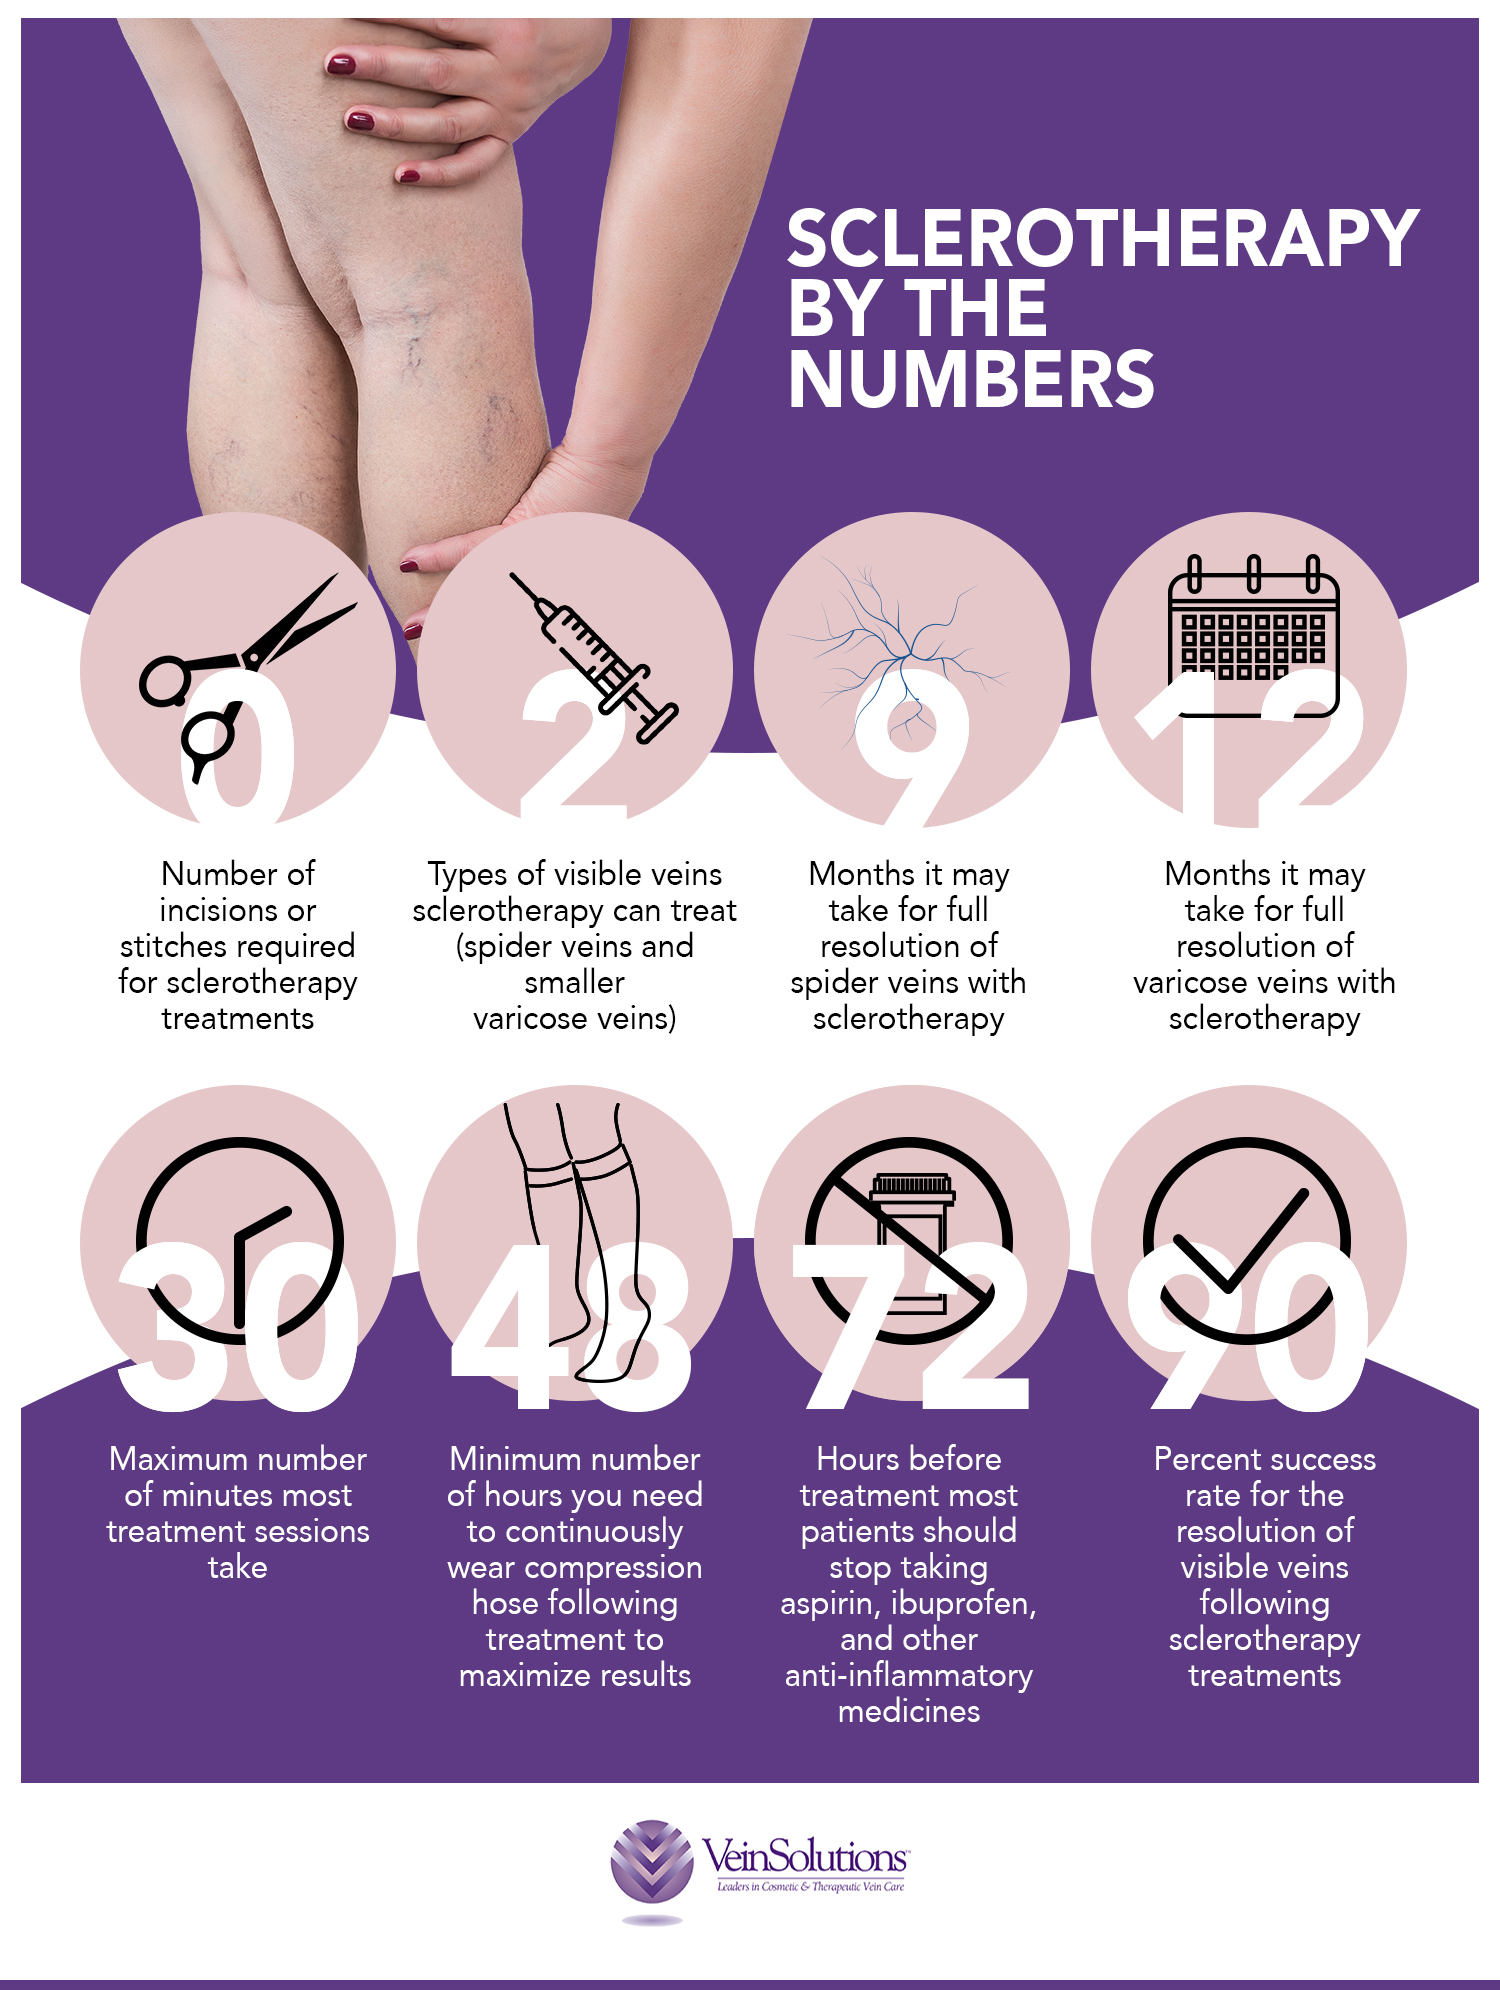 https://veinsolutionsaustin.com/wp-content/uploads/2021/11/VeinSolutions-Sclerotherapy-Infographic-v2.jpg